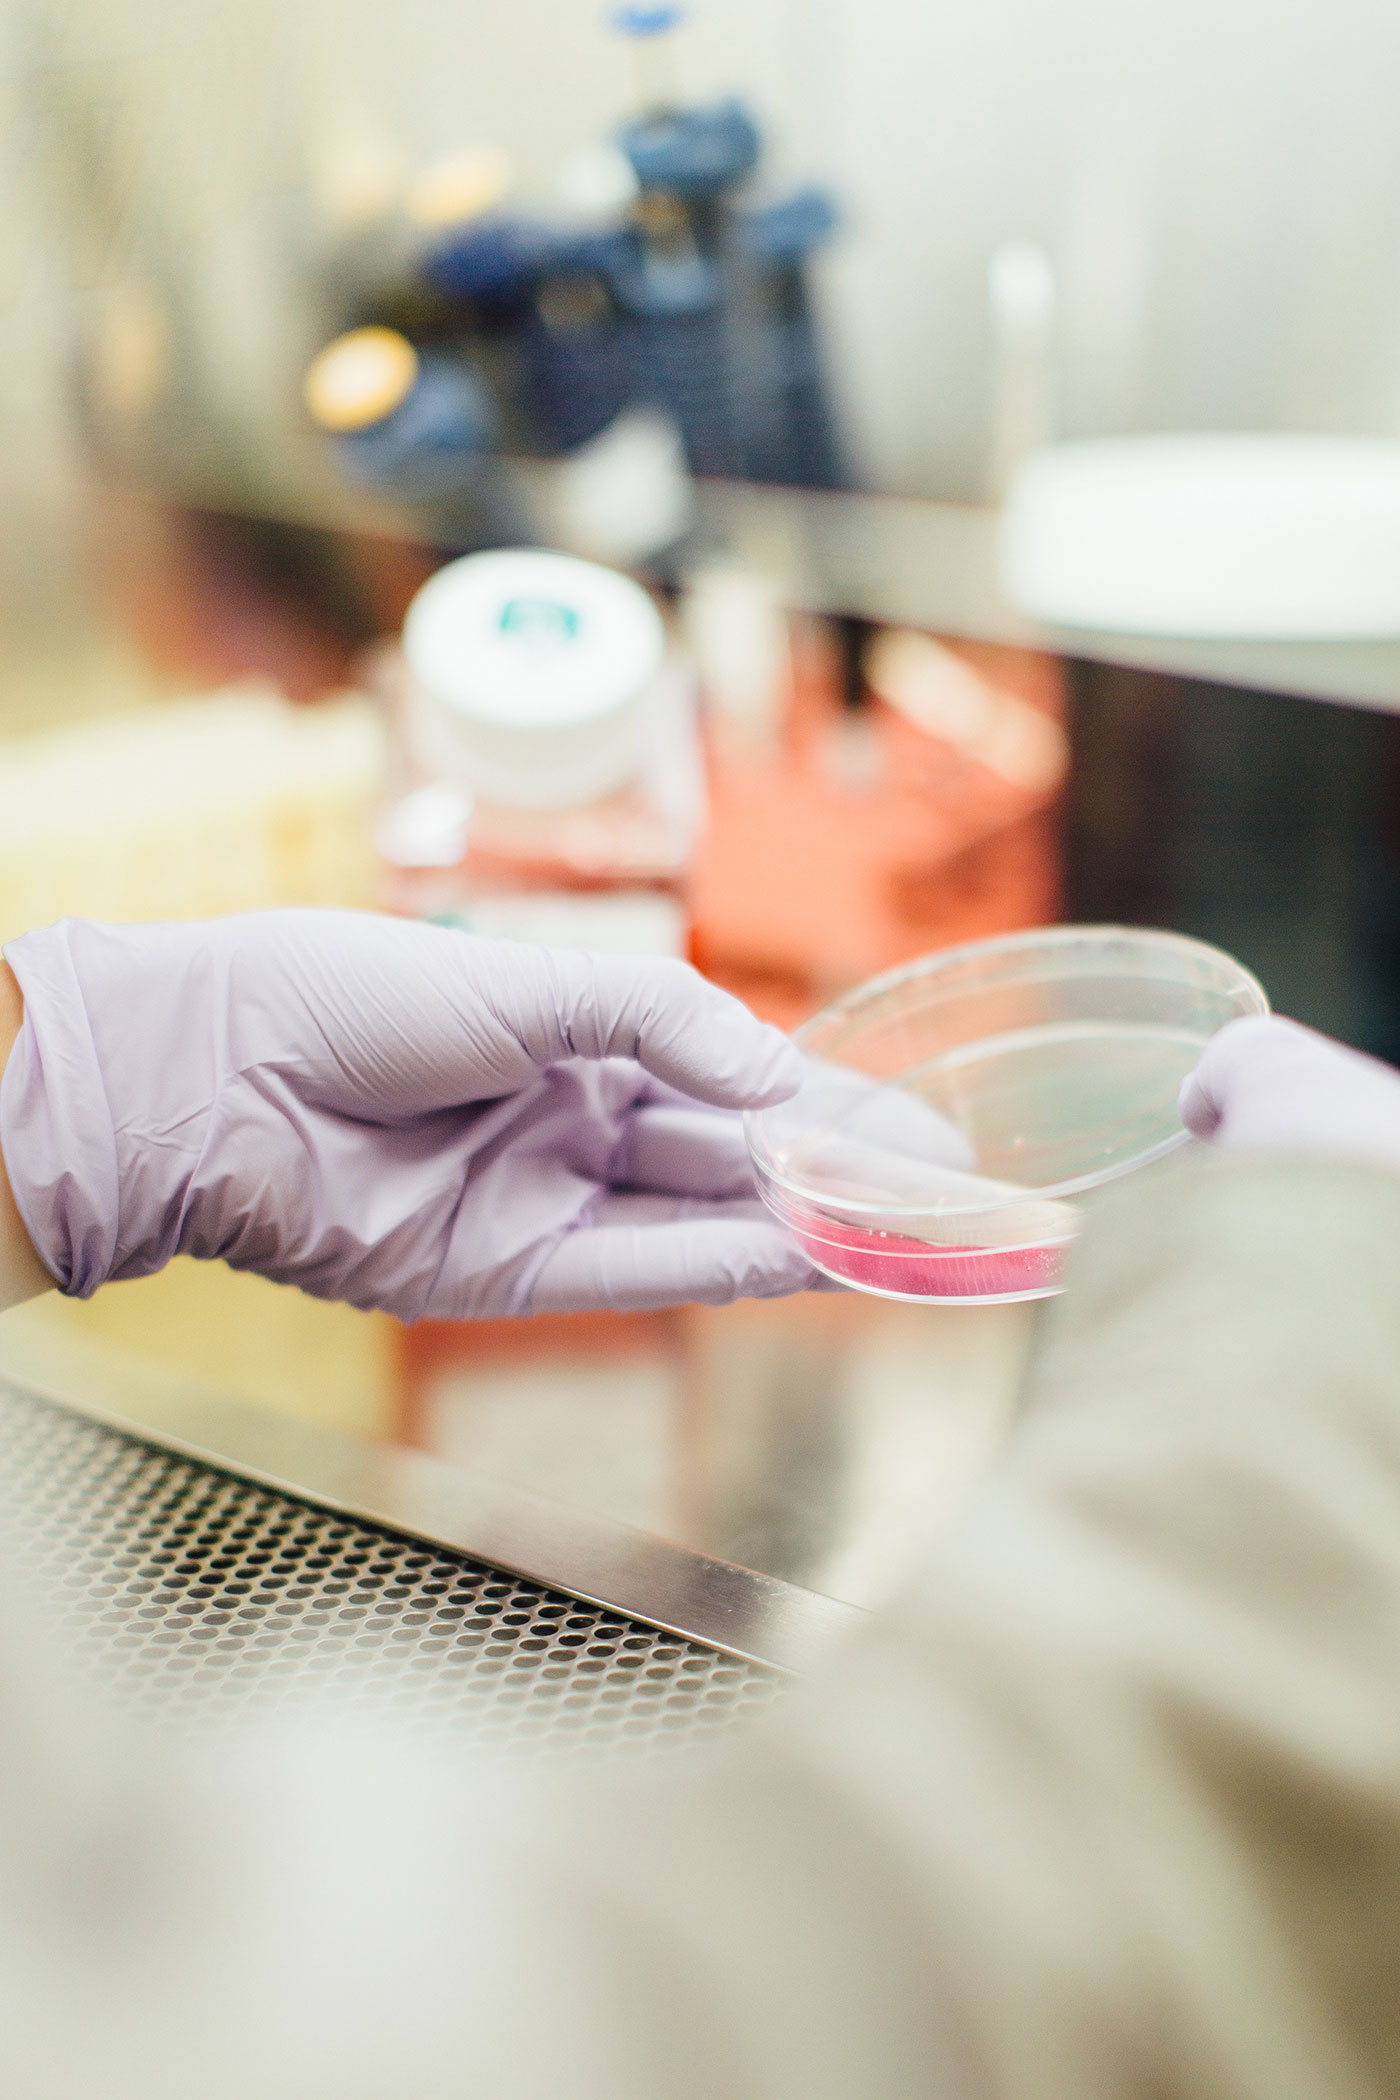 a person examining a petri dish containing a pink substance. 